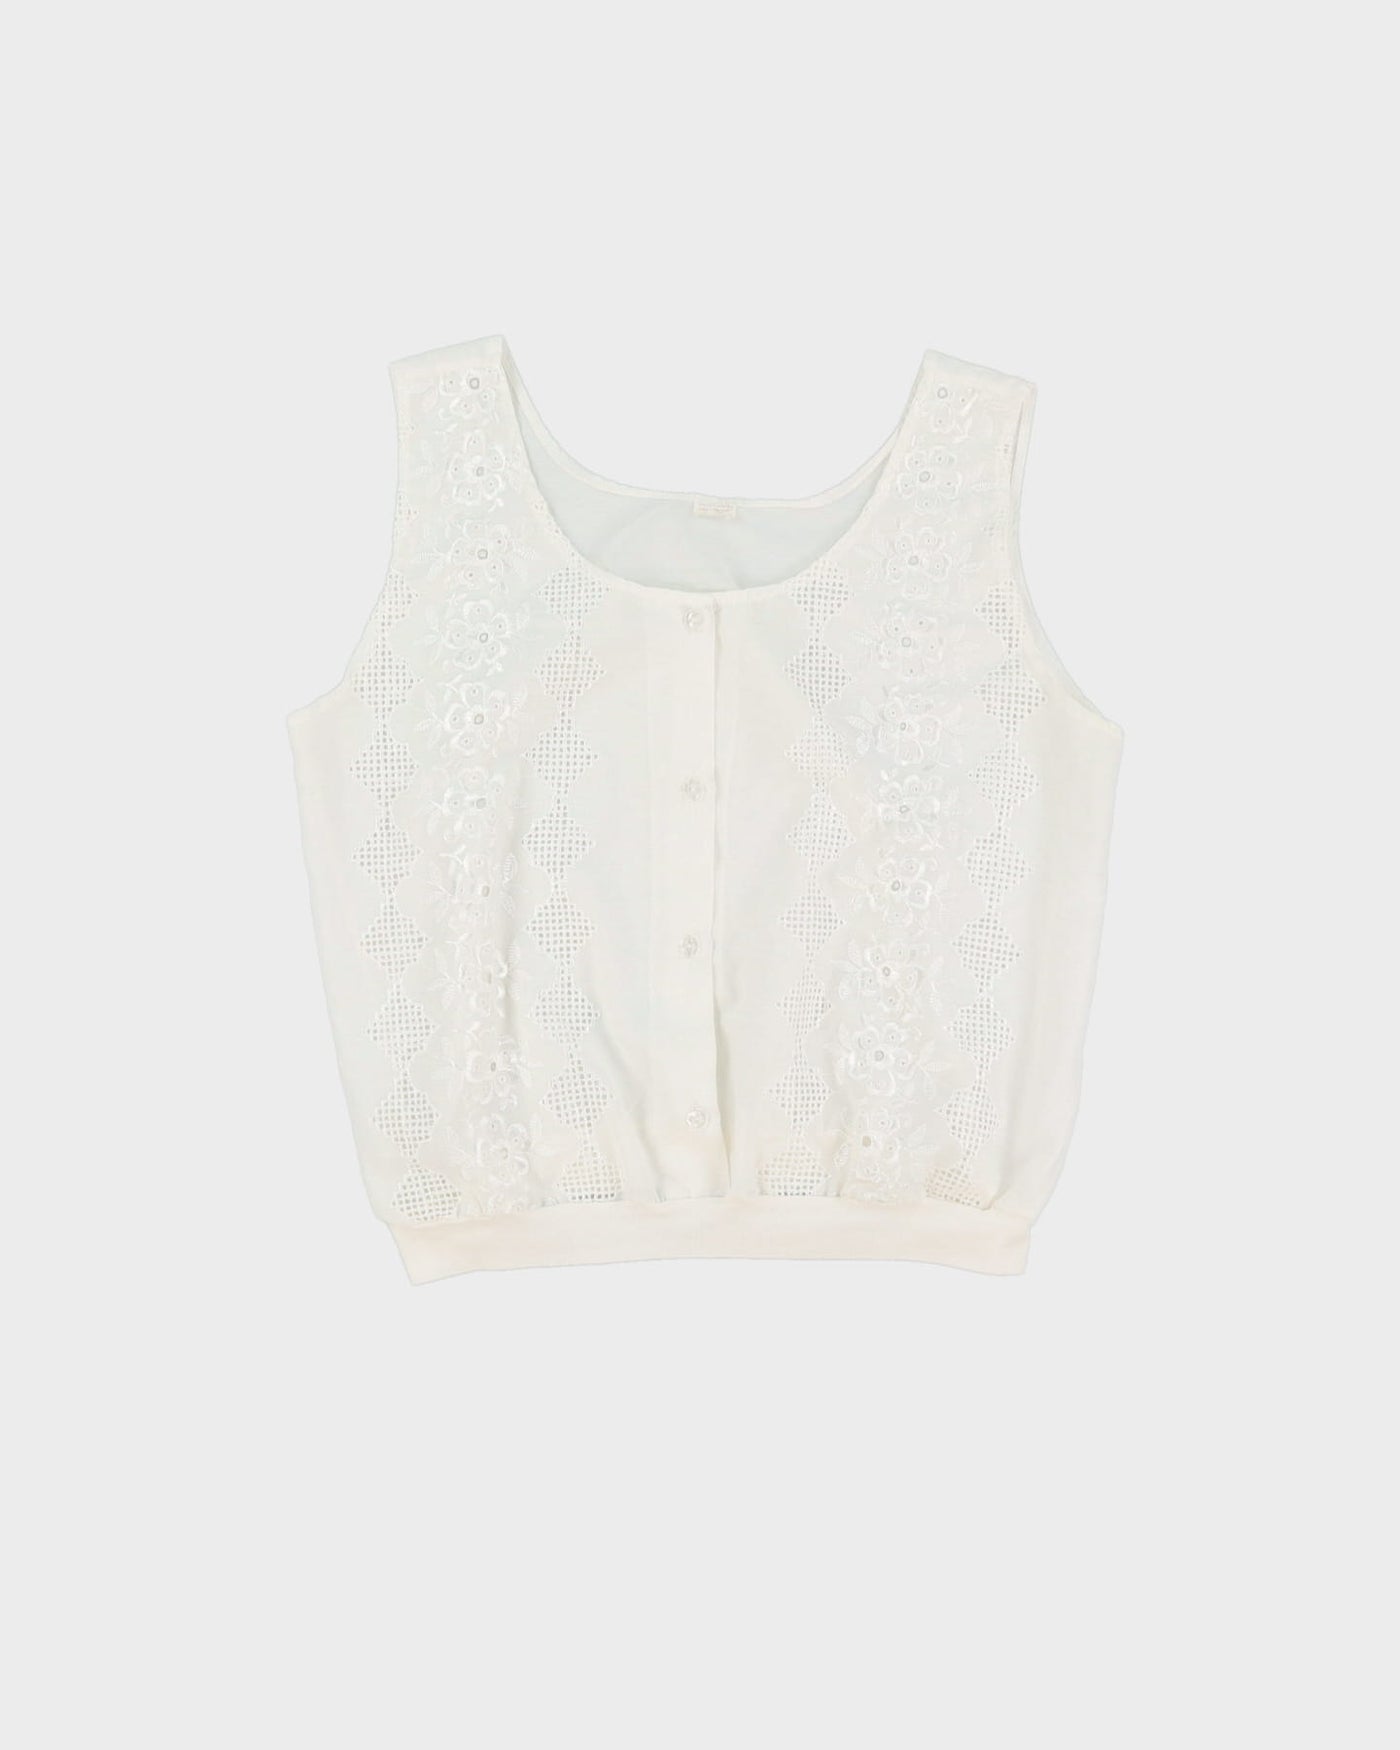 Vintage White Sleeveless Embroidered Top - M